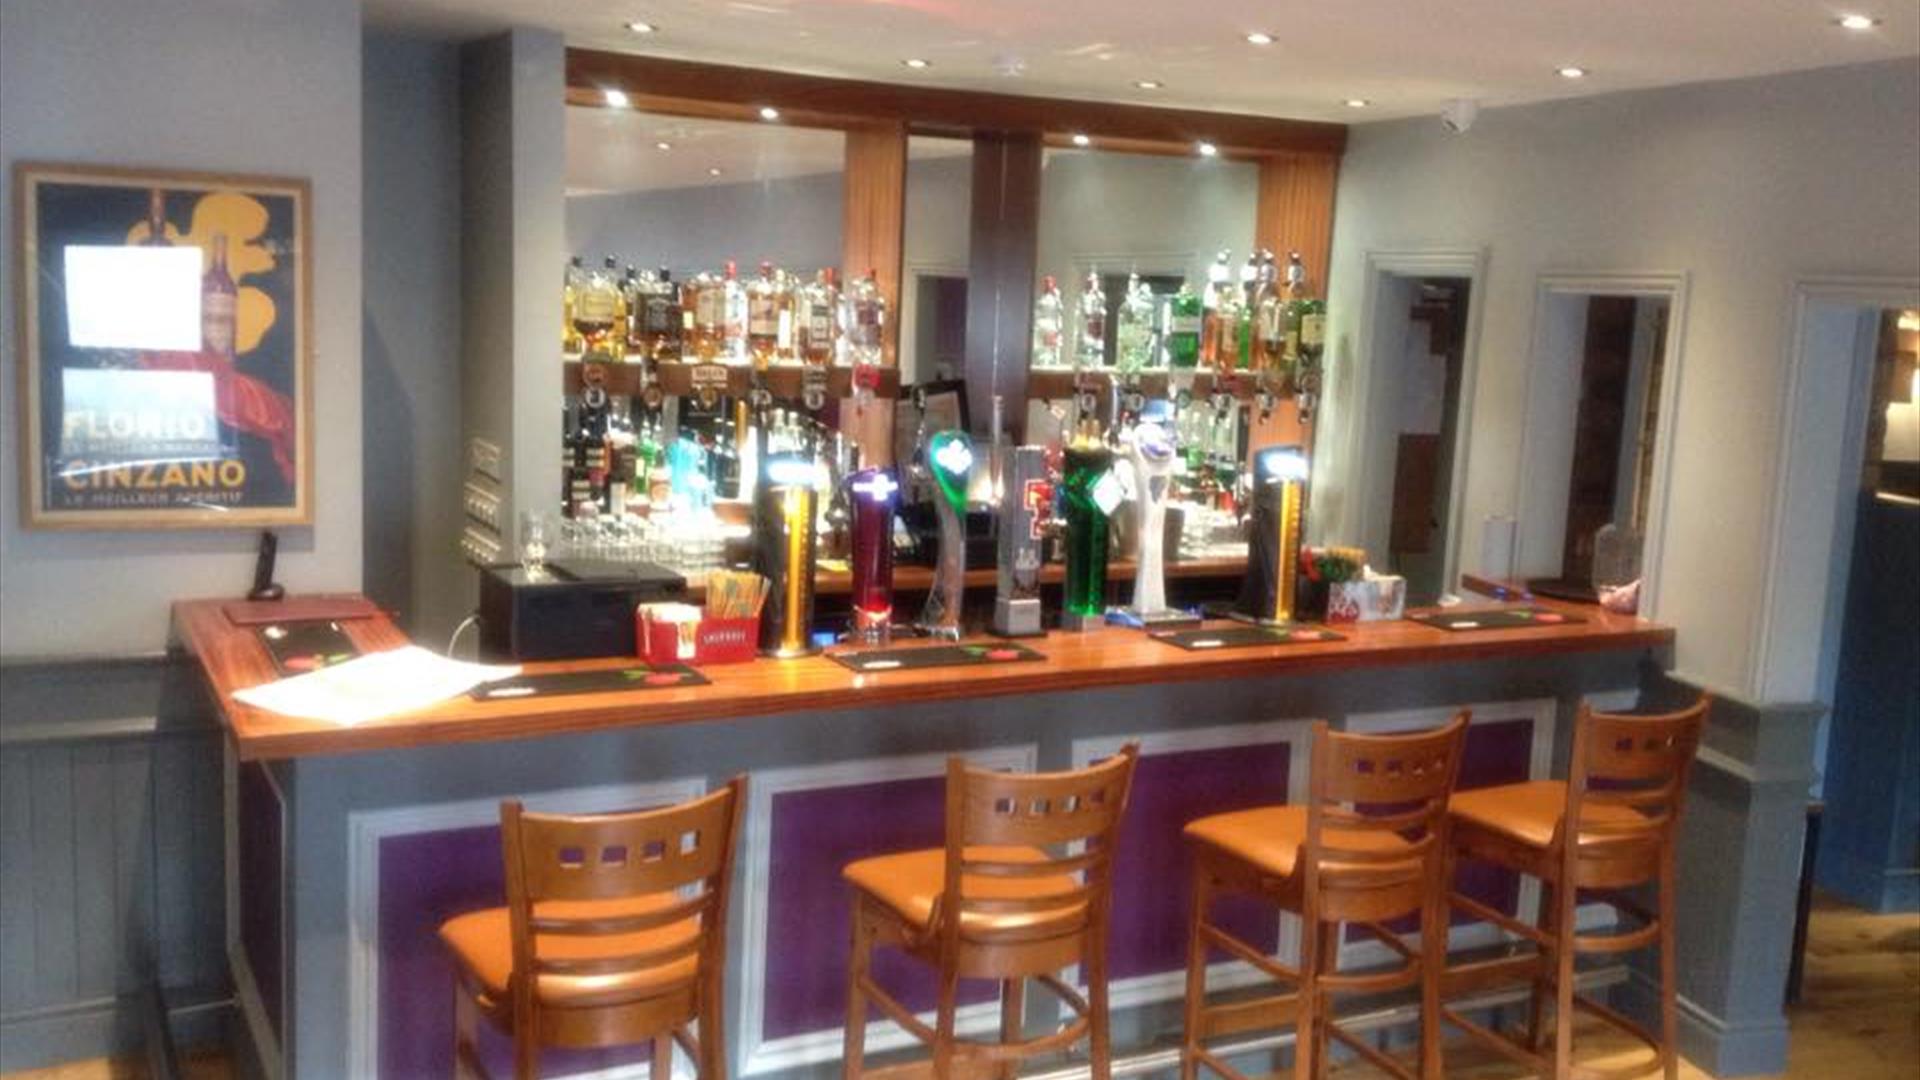 Image shows bar area with 4 bar stools on wooden bar bench and bar is painted a soft lilac colour with recessed lighting overhead.